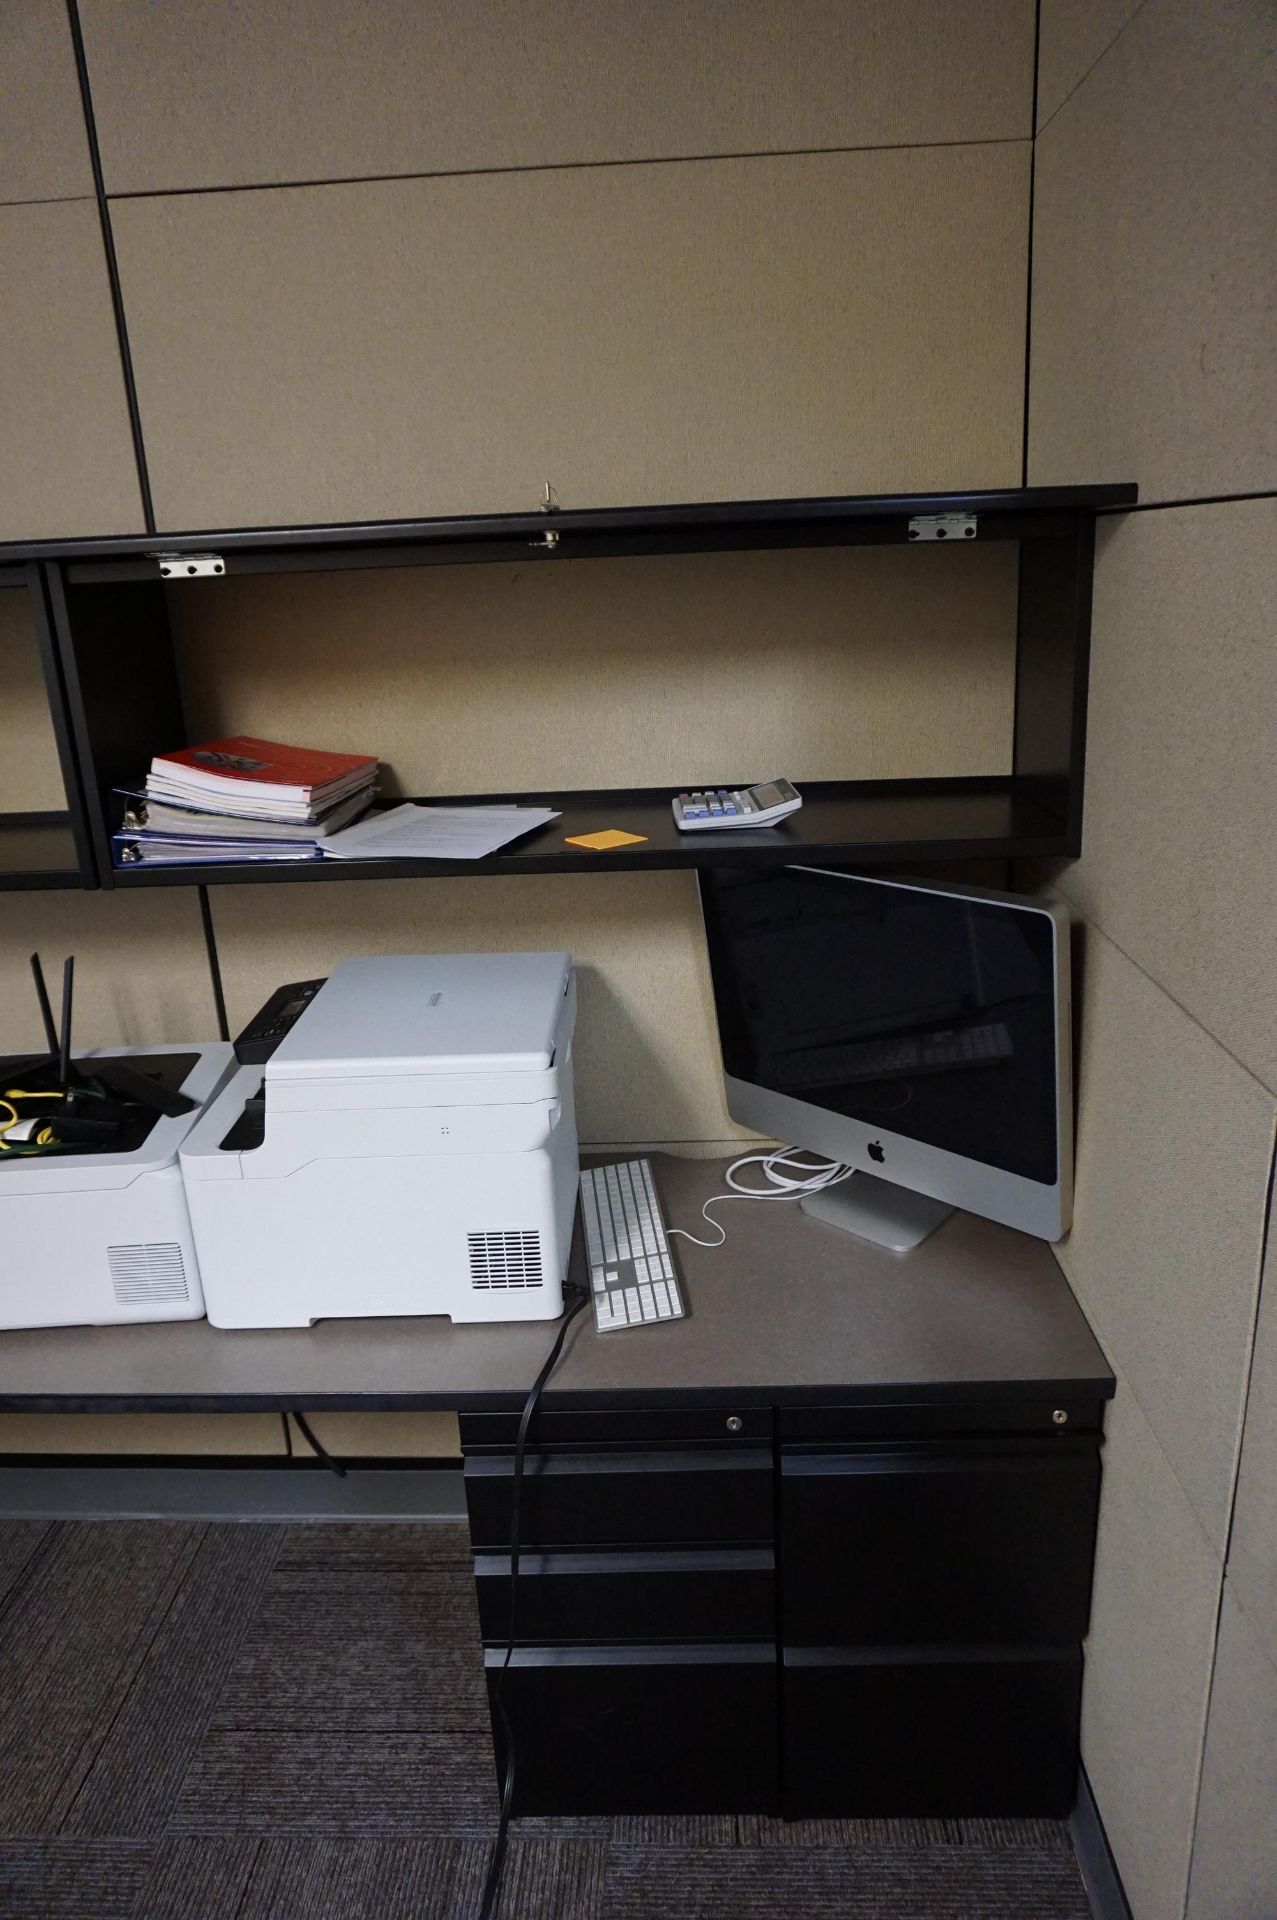 SECOND FLOOR OFFICE TO INCLUDE: WRAPAROUND OFFICE DESK WITH ATTACHED FILE CABINETS, OFFICE CHAIRS * - Image 3 of 6